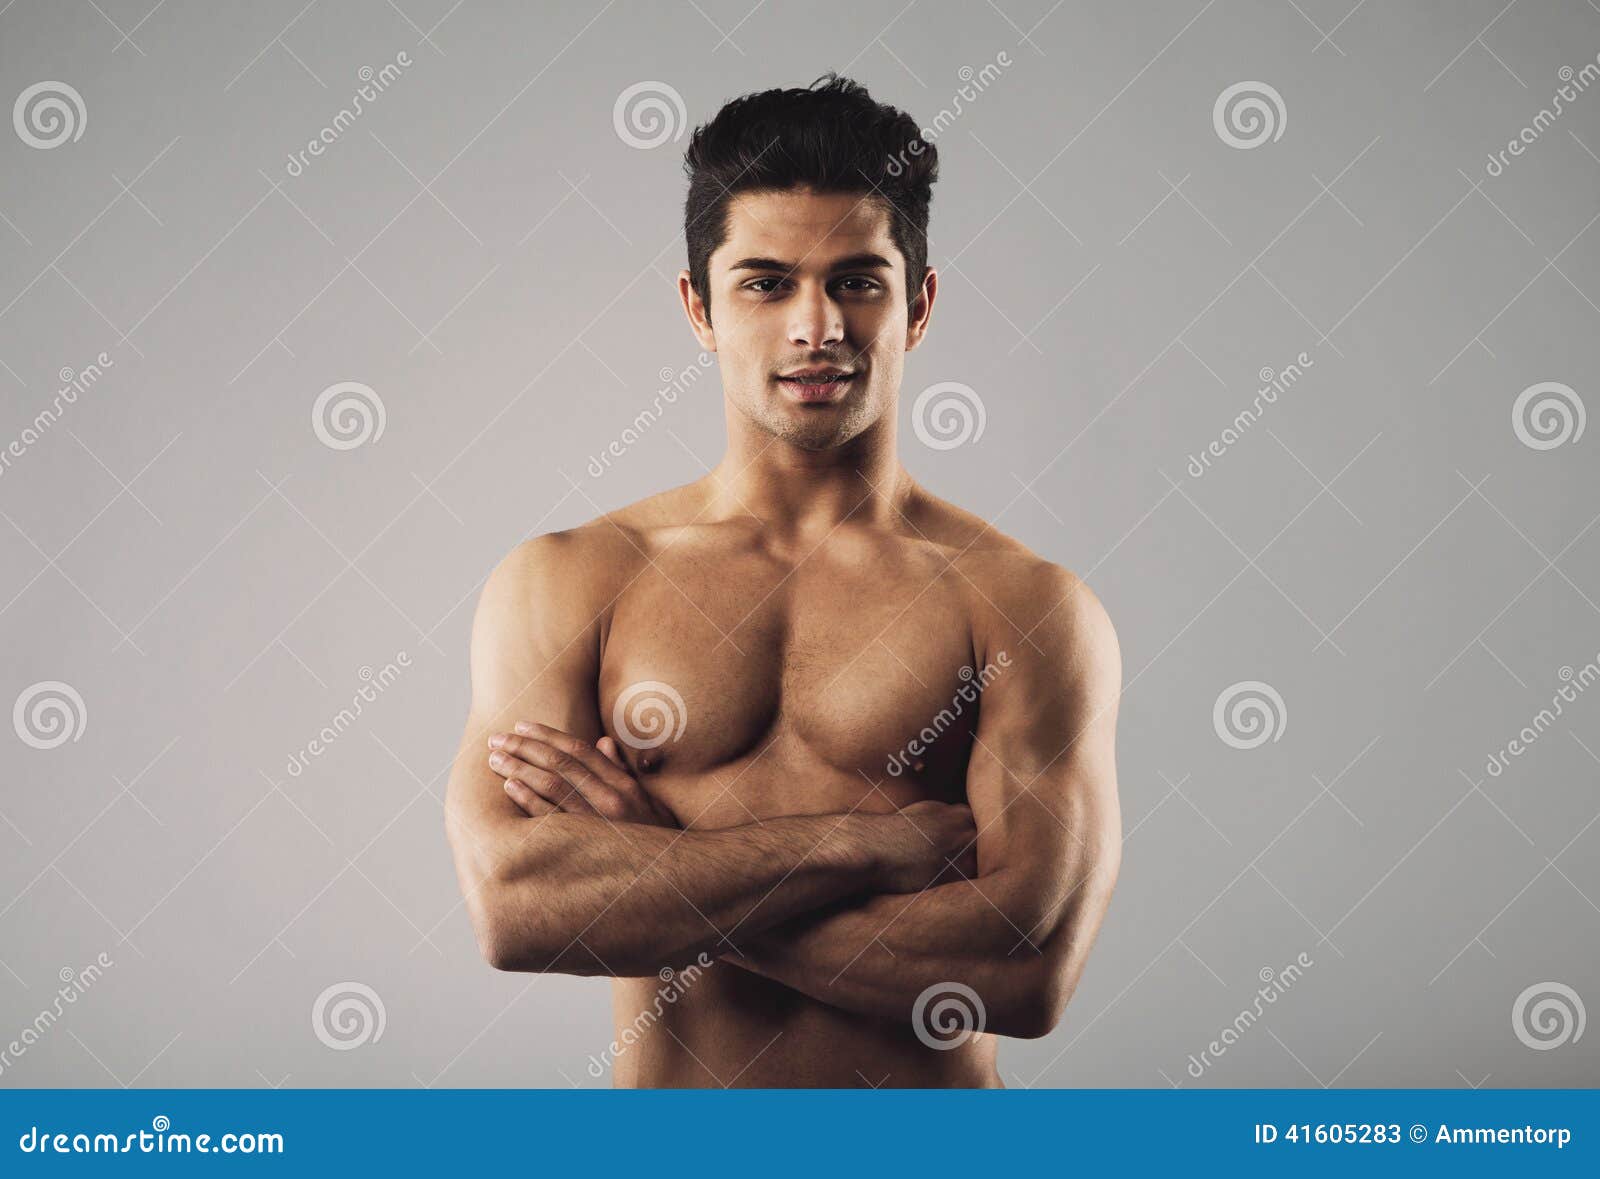 Bare-chested Muscular Man Standing on Grey Background Stock Image ...